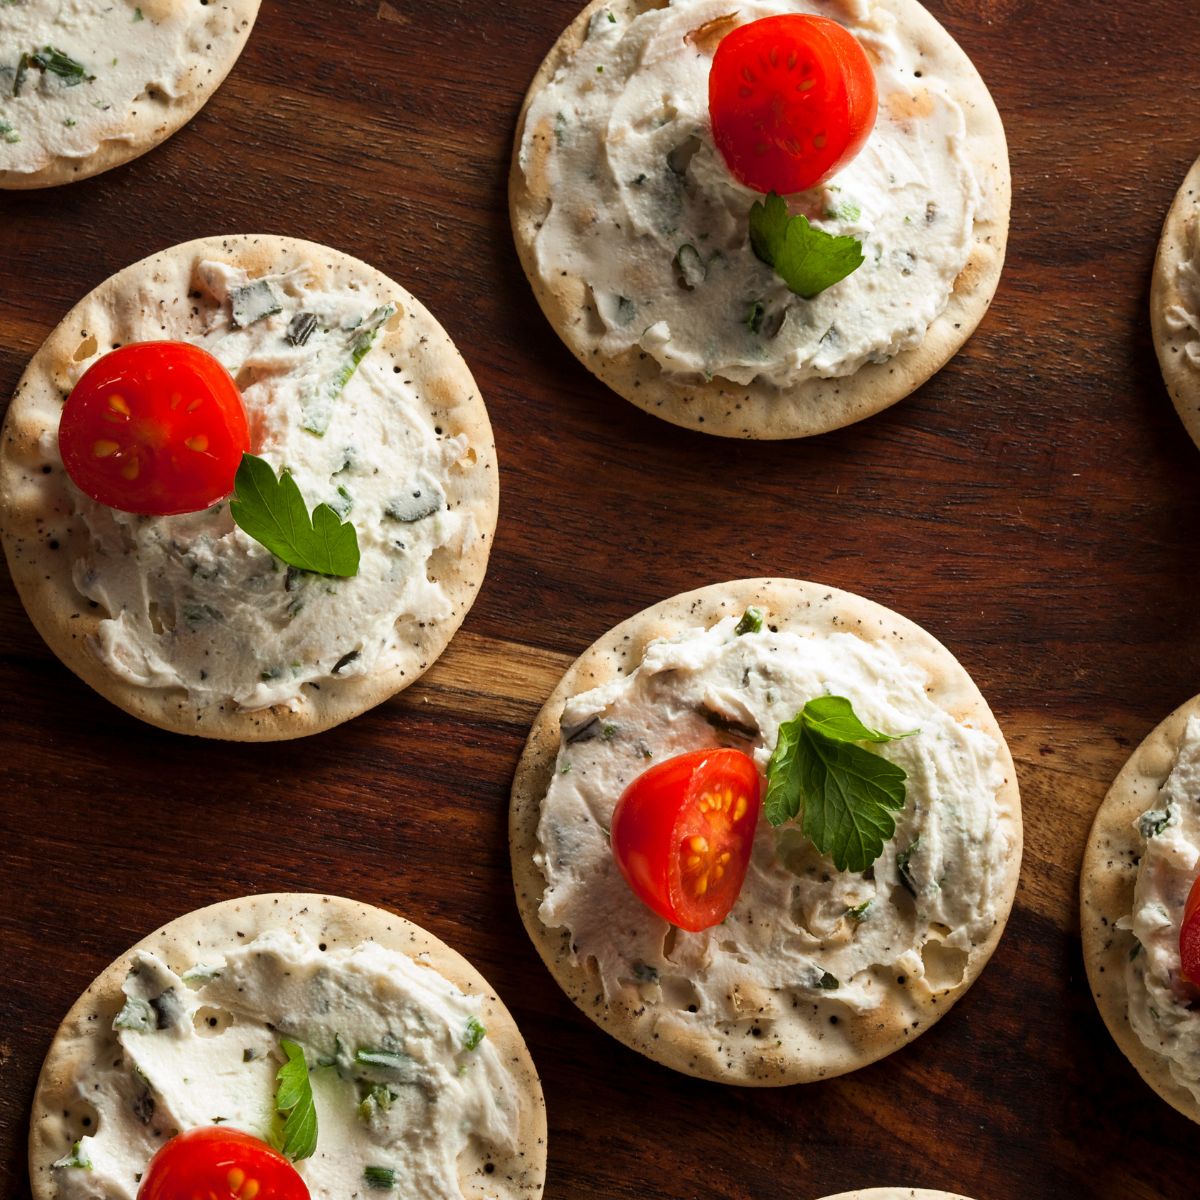 hors d’oeuvres: cheese spread on crackers with a topping of parsley and half of a cherry tomato. 